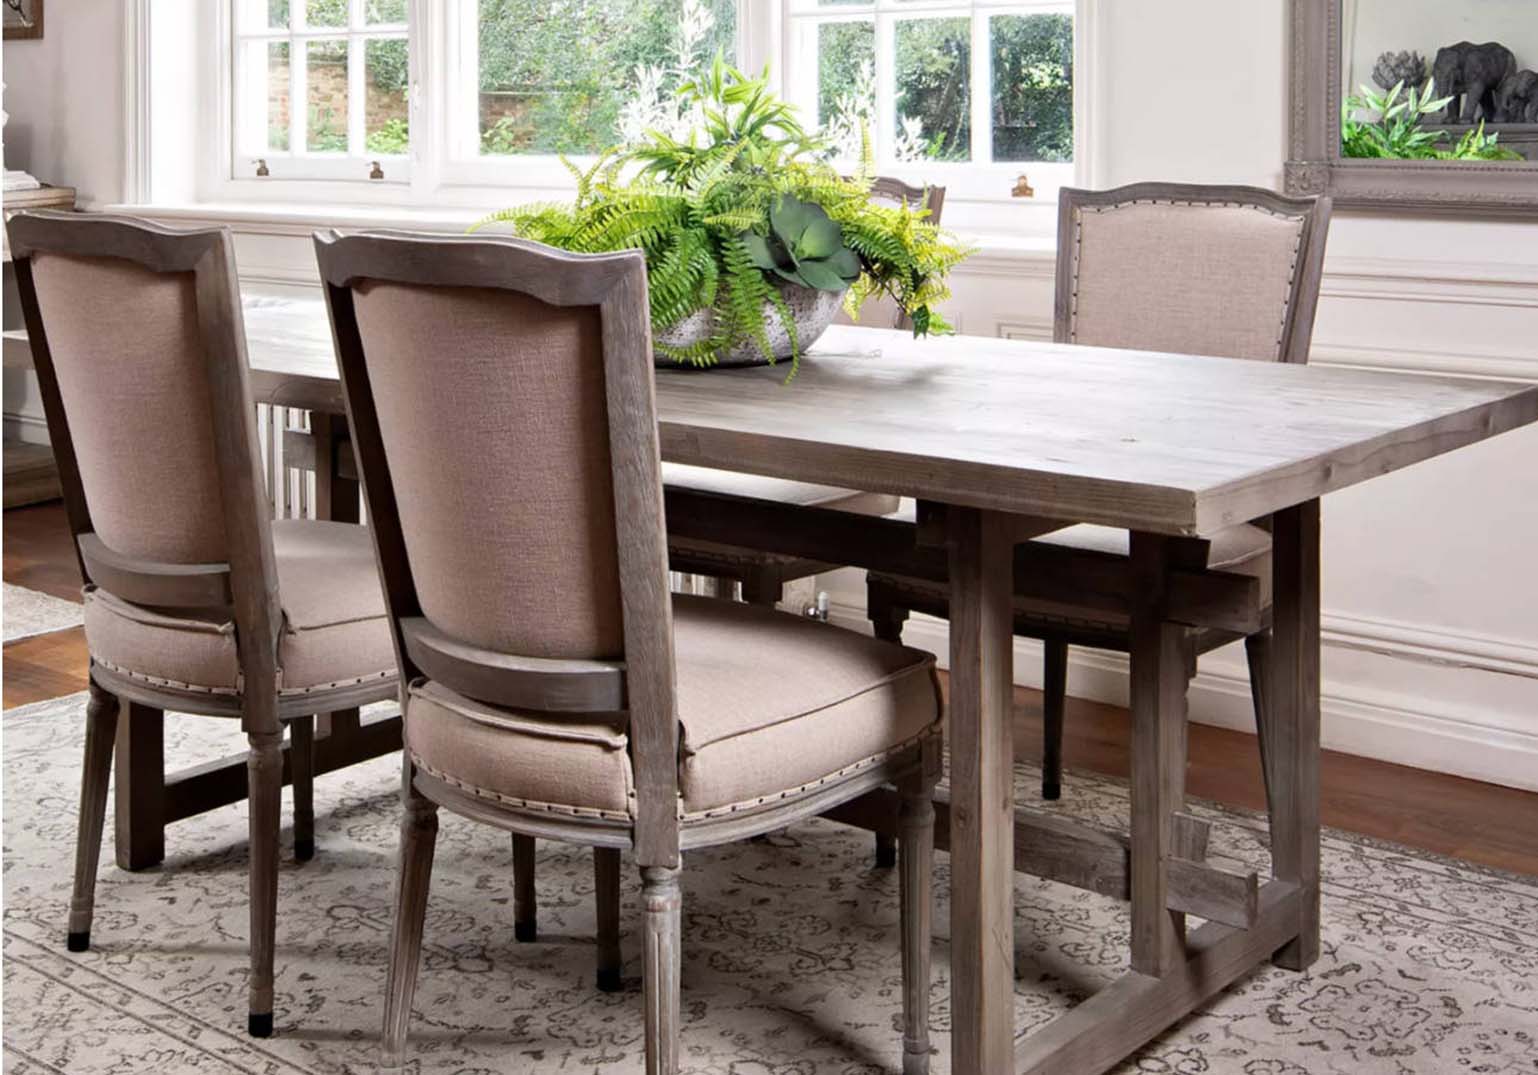 Dining Decoded: Making a Statement with Timeless Table Designs